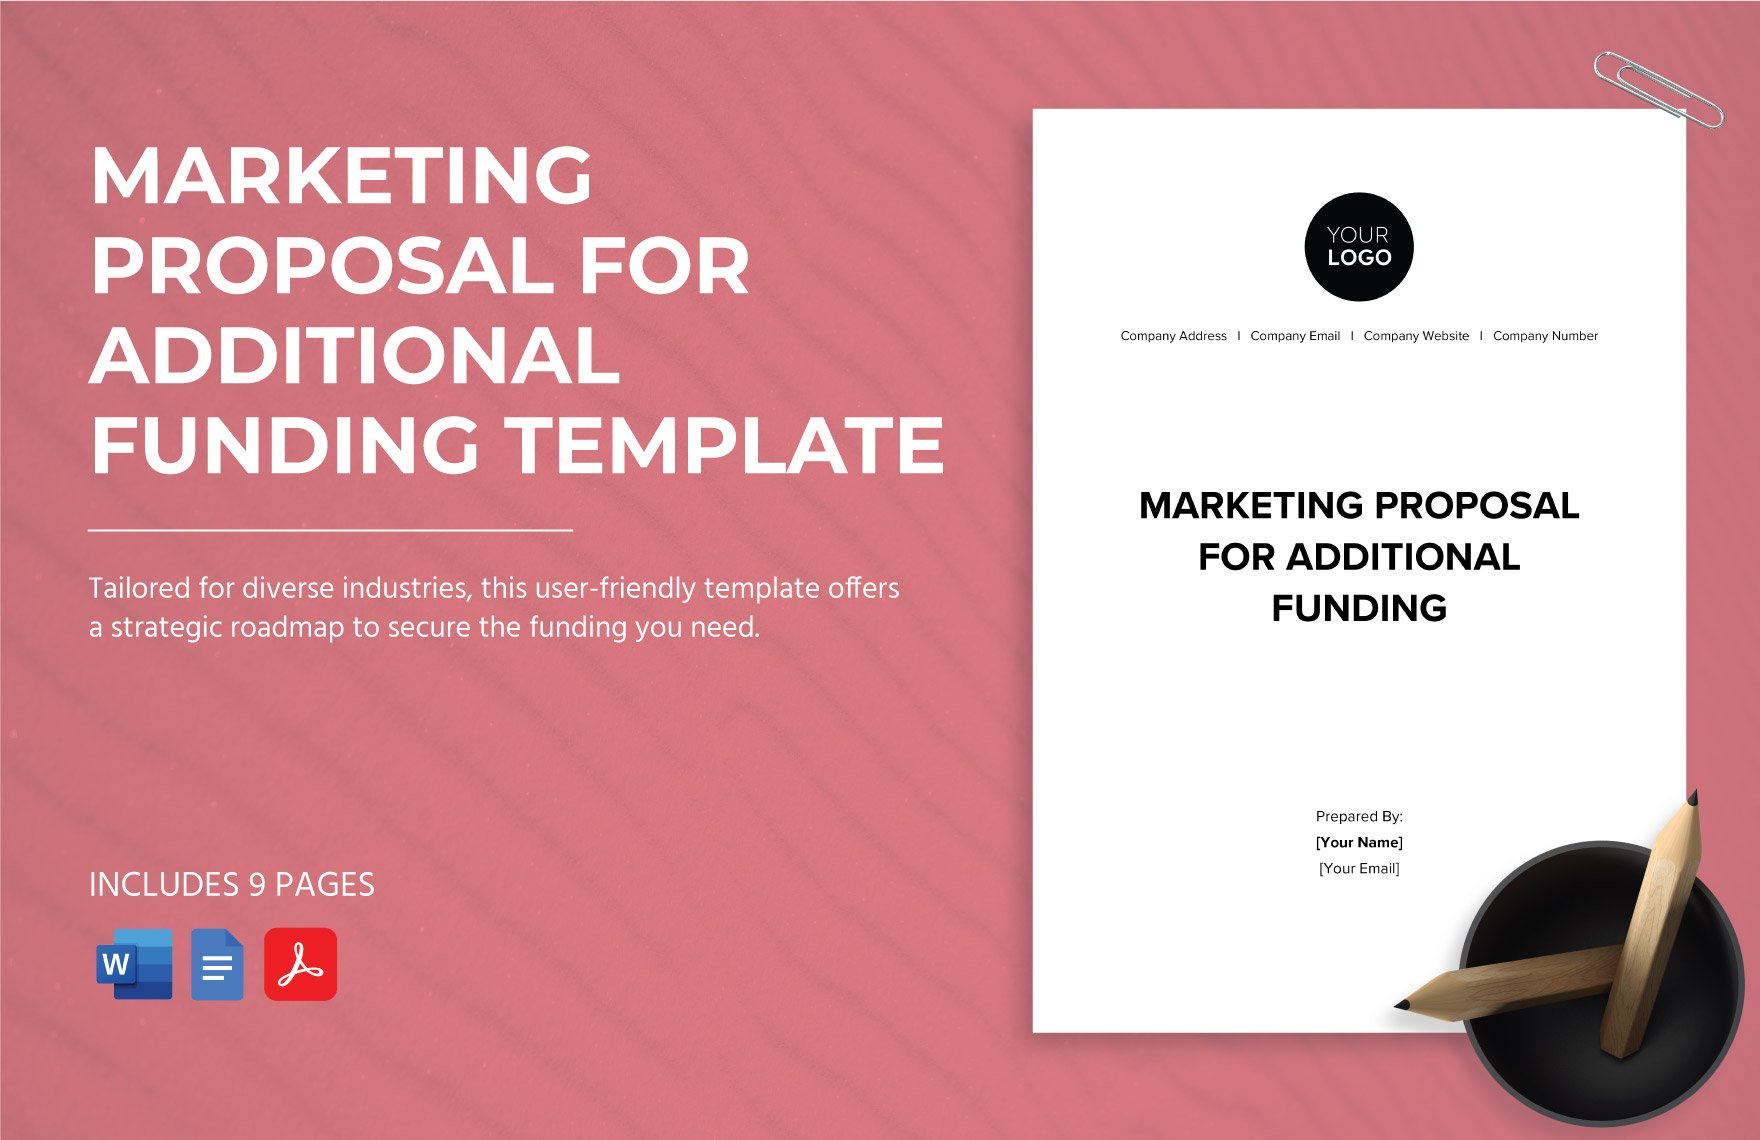 Marketing Proposal for Additional Funding Template